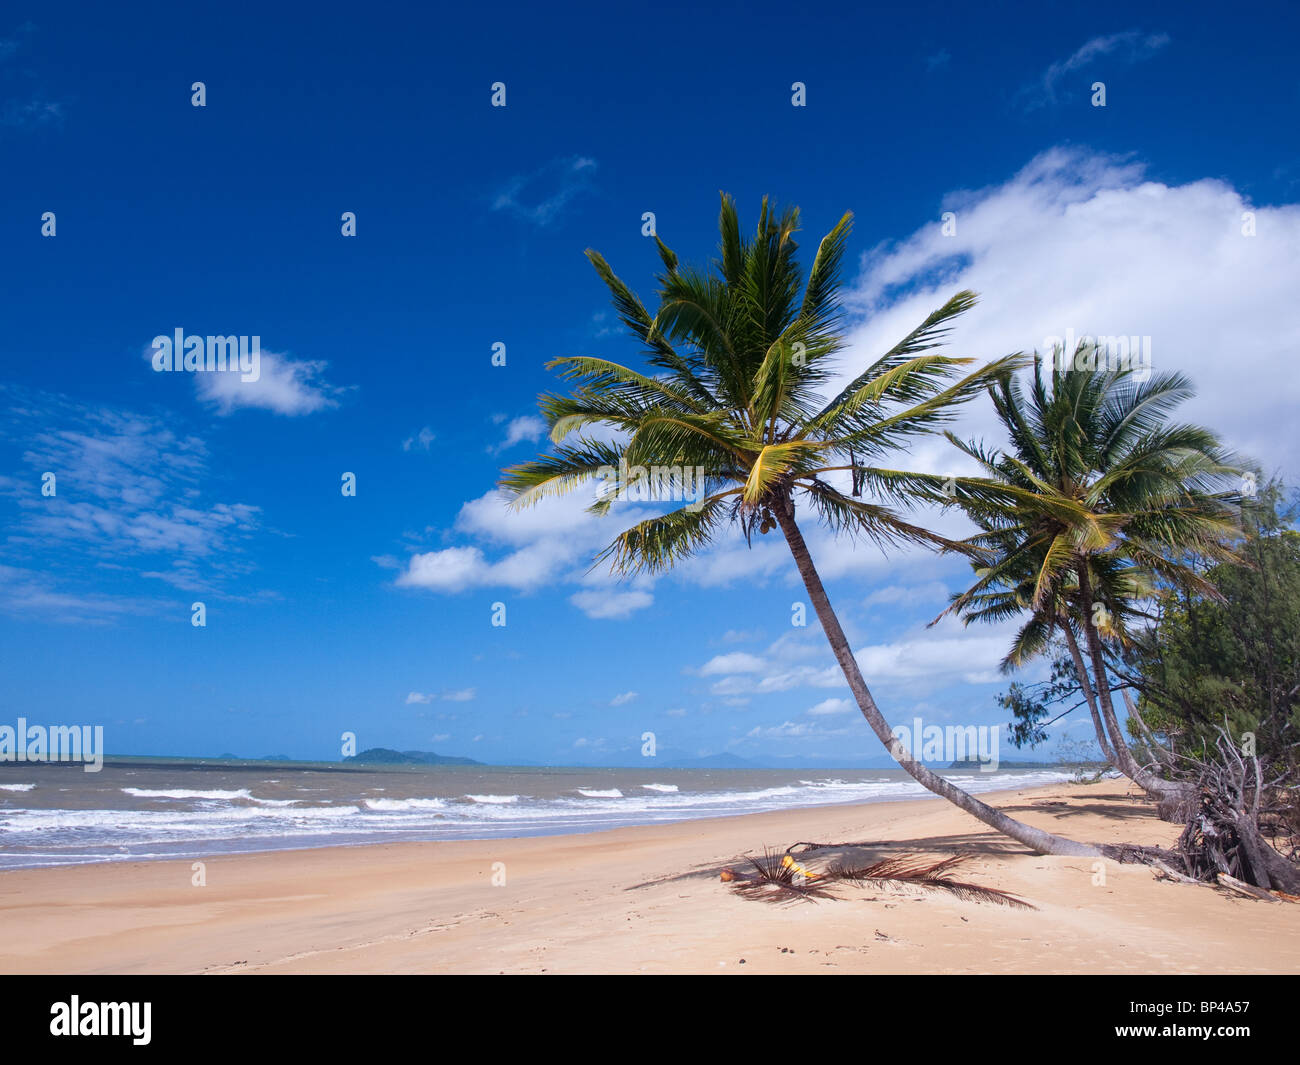 Sandy beaches, palm trees and blue skies in South Mission Beach, Queensland, Australia. Stock Photo